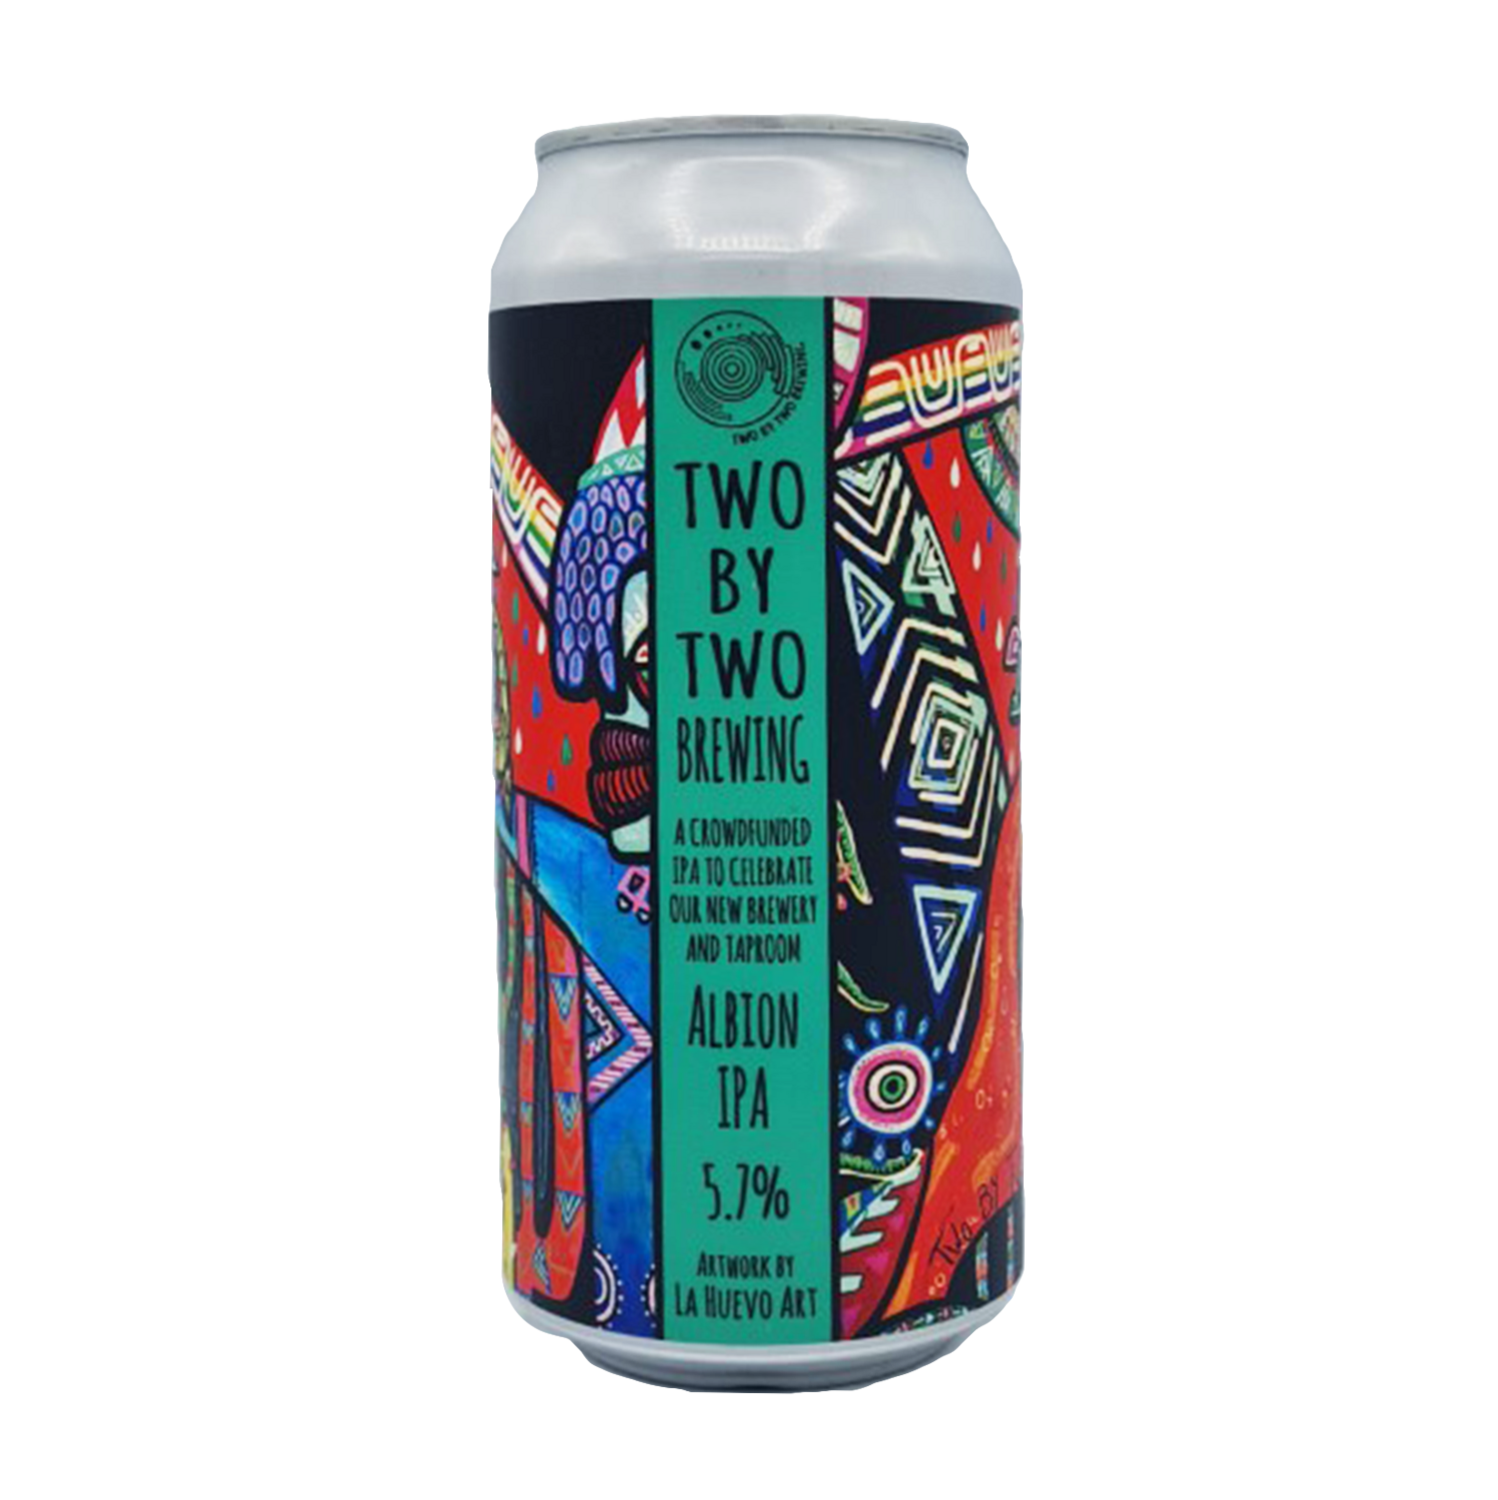 Two by Two Albion IPA